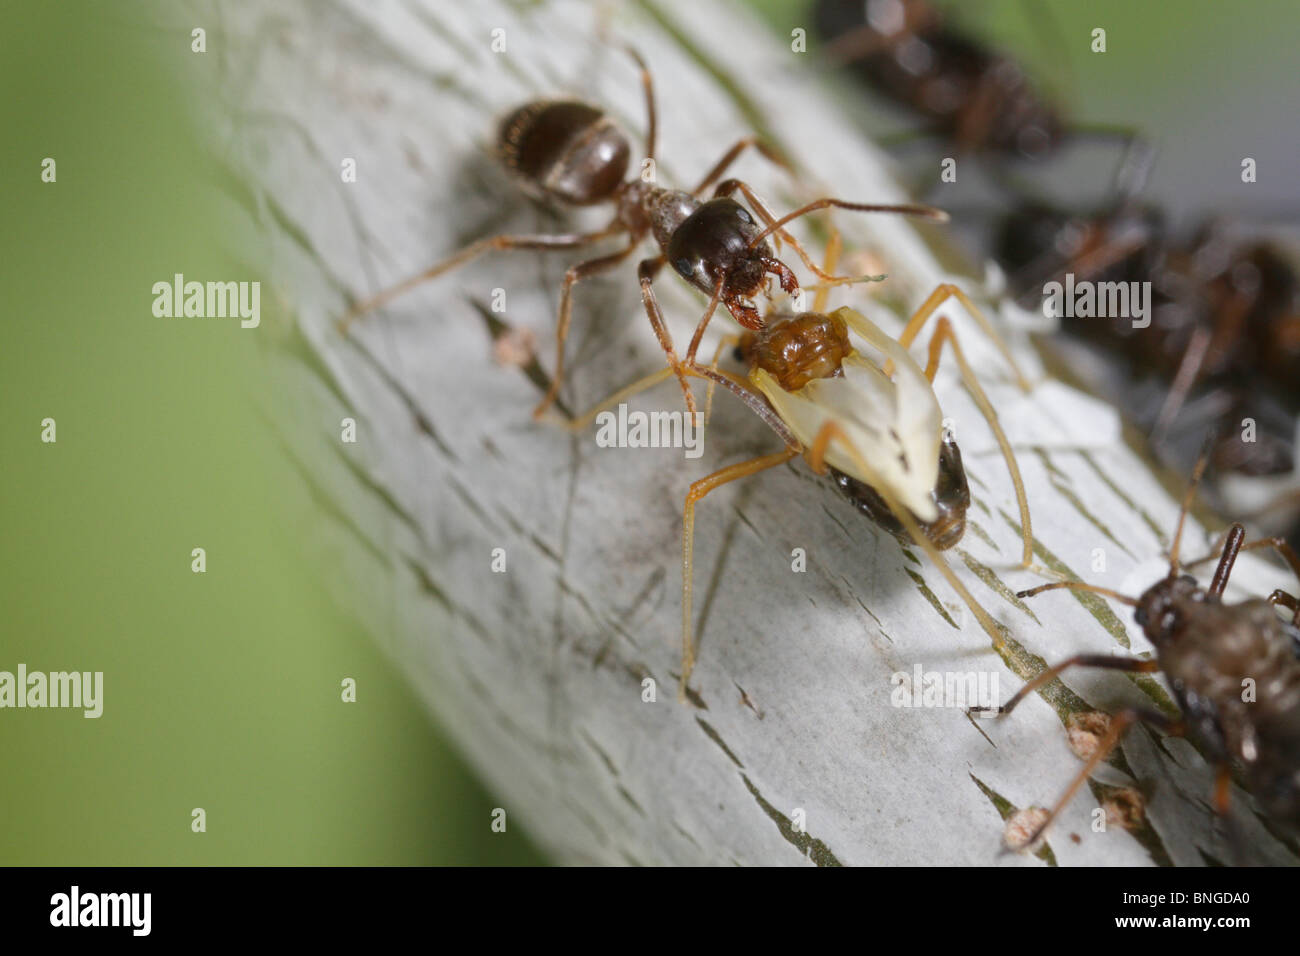 Lachnus roboris, an aphid, shedding its skin and becoming an alate (with wings). A Lasius niger ant is nearby Stock Photo